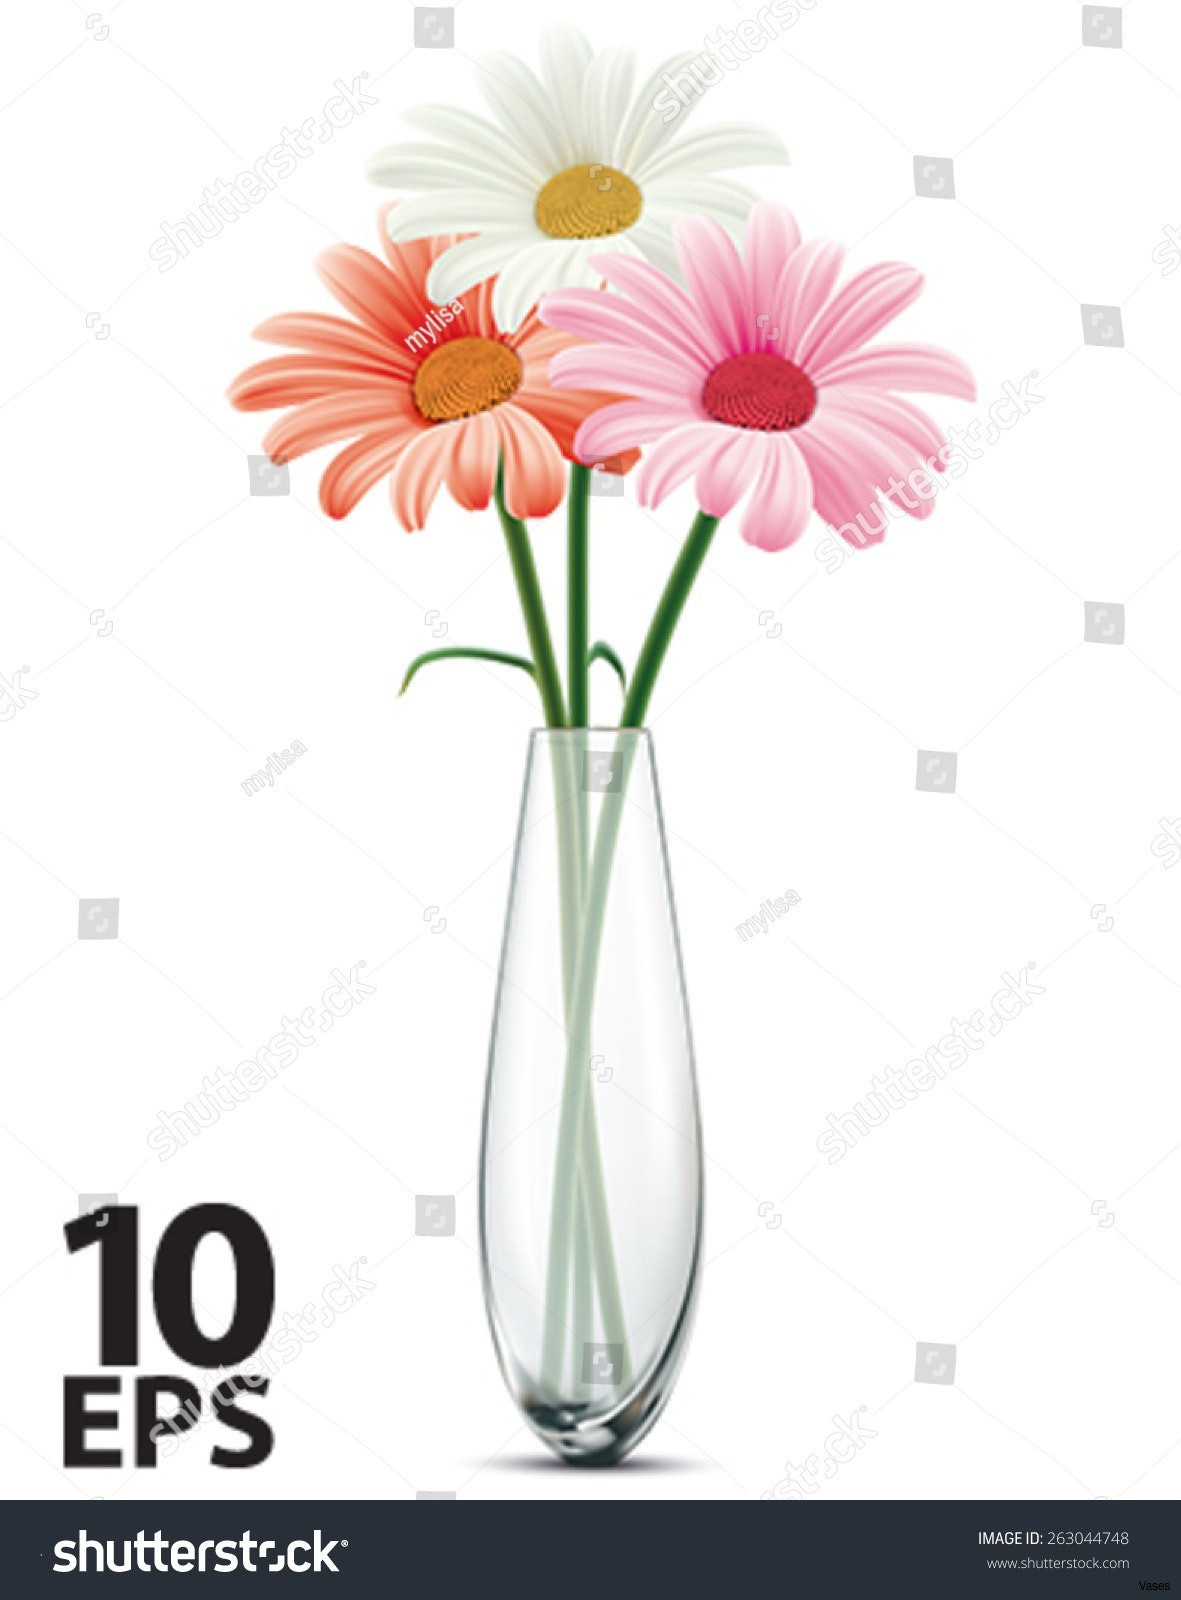 24 Popular Gerbera Daisy Arrangements Vases 2024 free download gerbera daisy arrangements vases of unique picture of gerbera flower natural zoom with 1248 s3 assortment 201 04h vases daisy in vase i 0d flower design inspiration bouquet